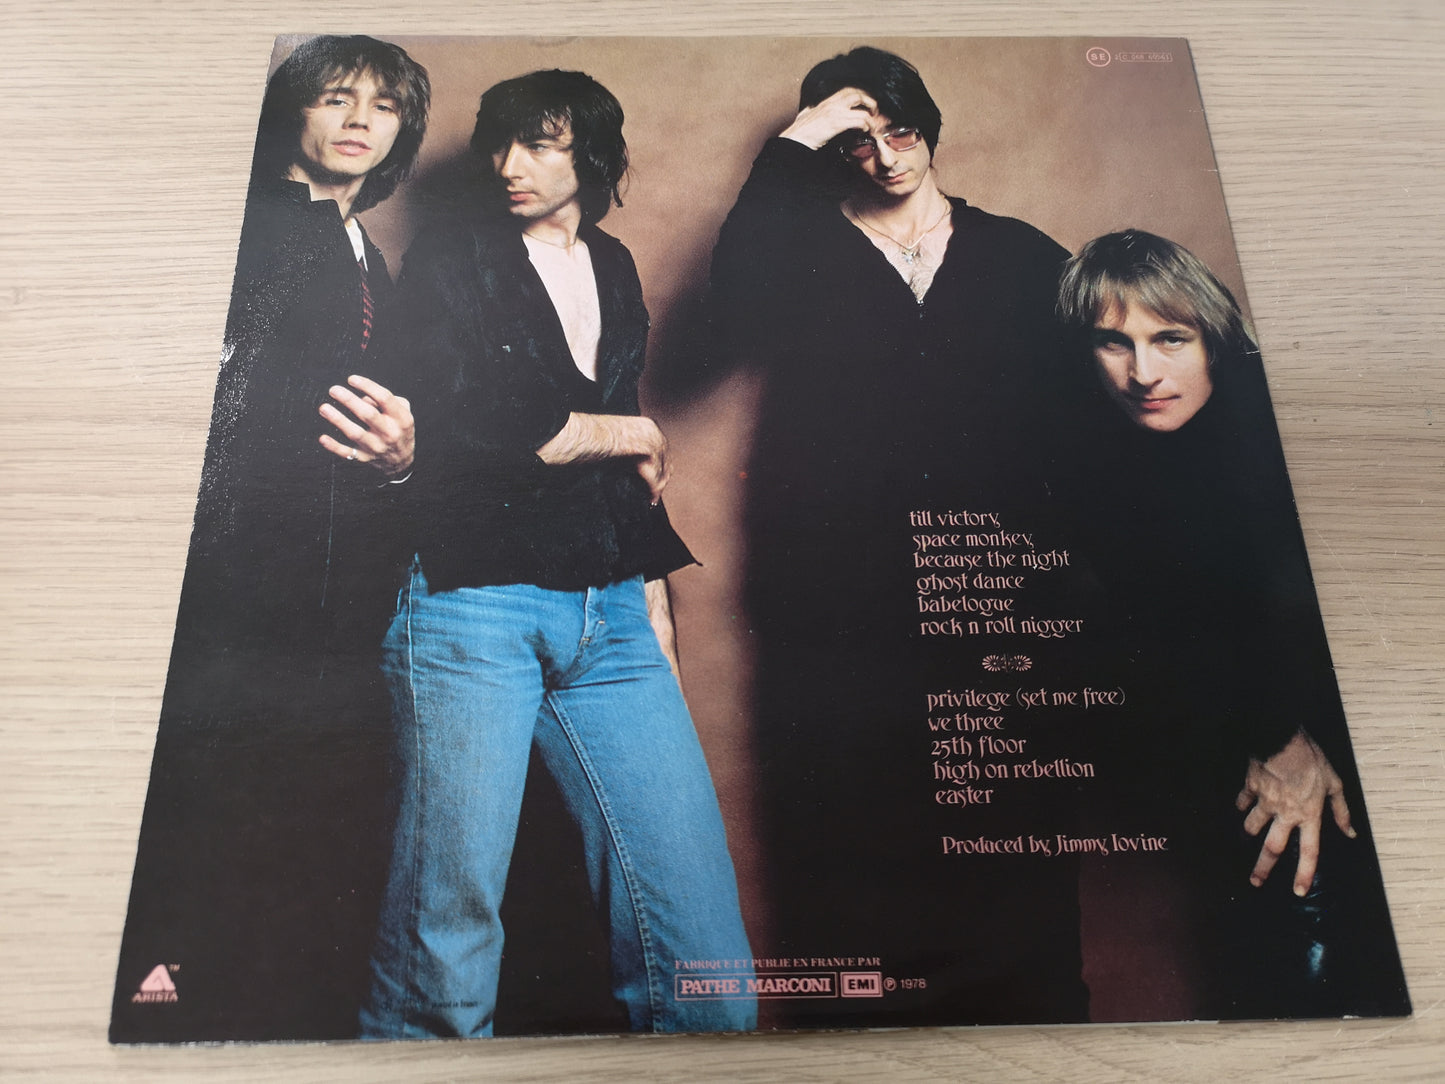 Patti Smith Group "Easter" Orig France 1978 EX/EX